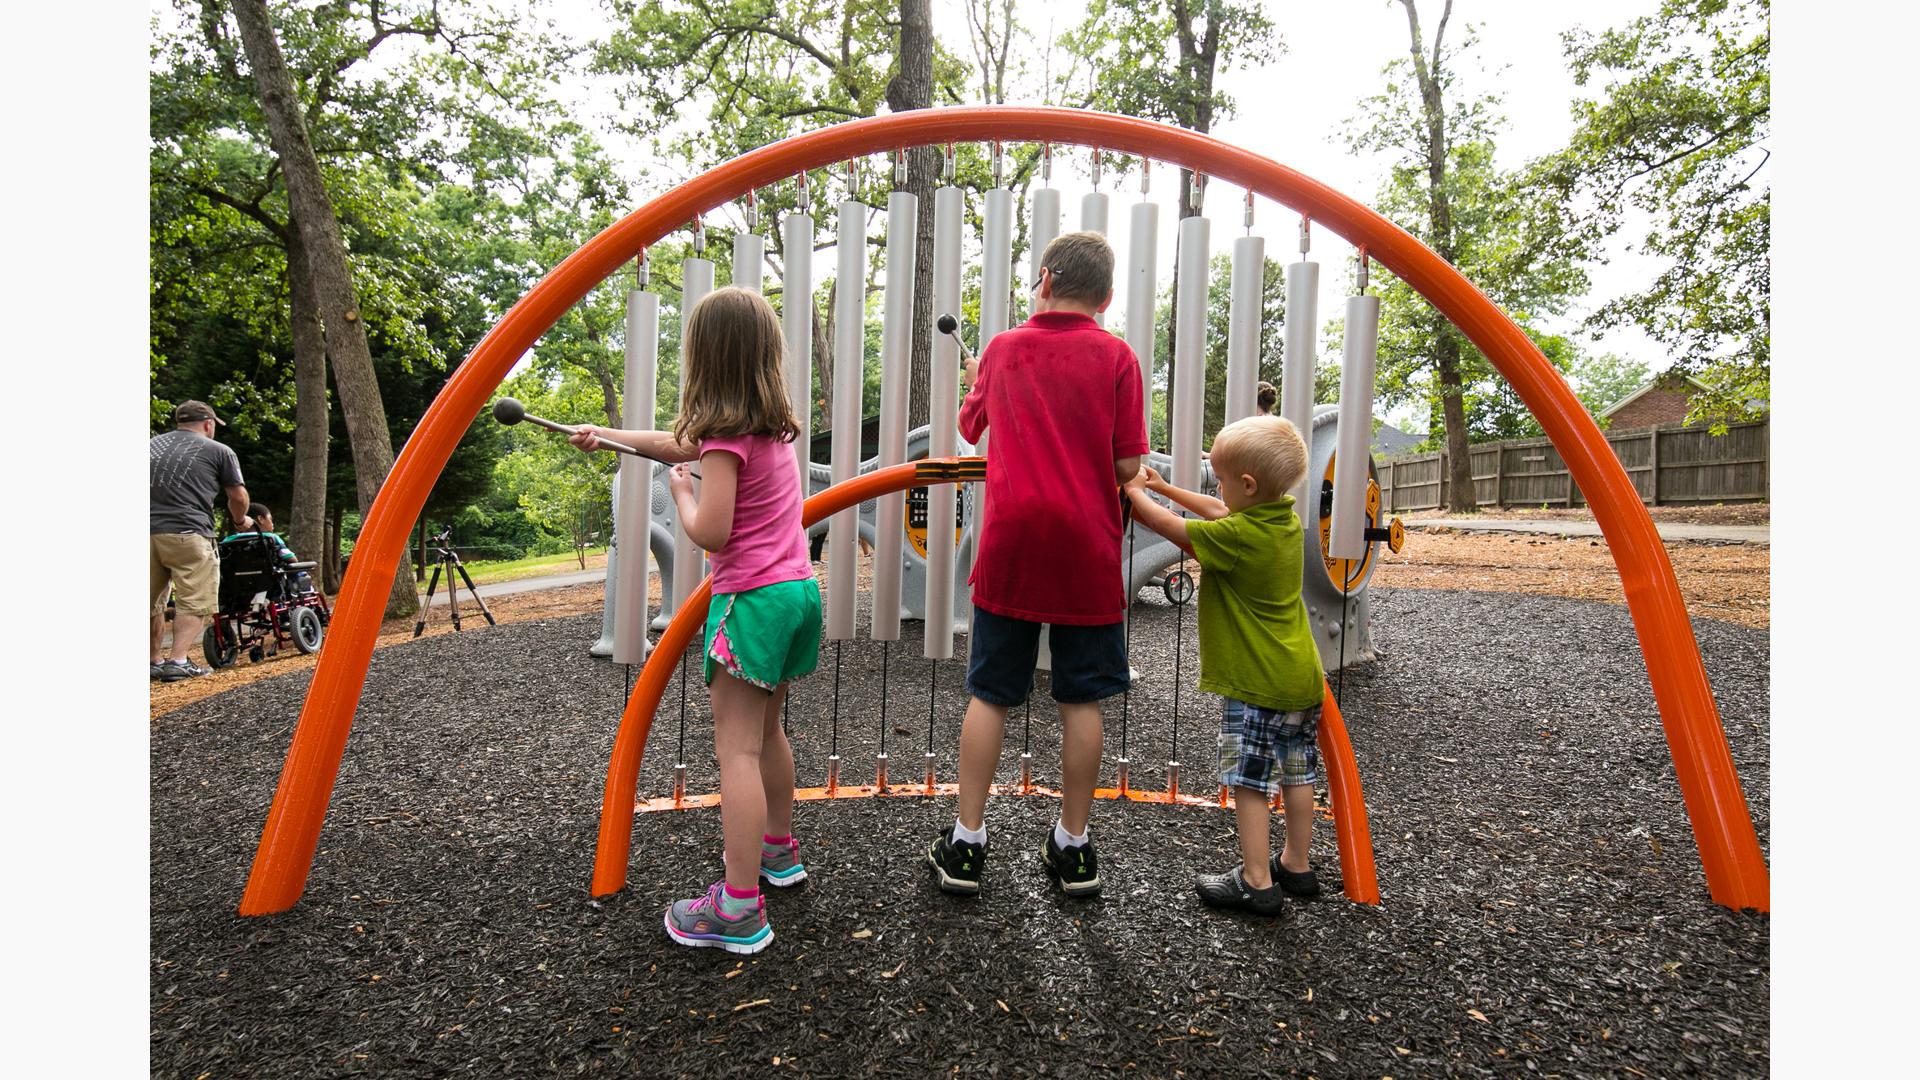 Landscape Structures on X: Playgrounds and outdoor play do more than  expend children's excess energy. Our playground products + environments,  designed with age-appropriate challenge in mind, entice children to stay  active while